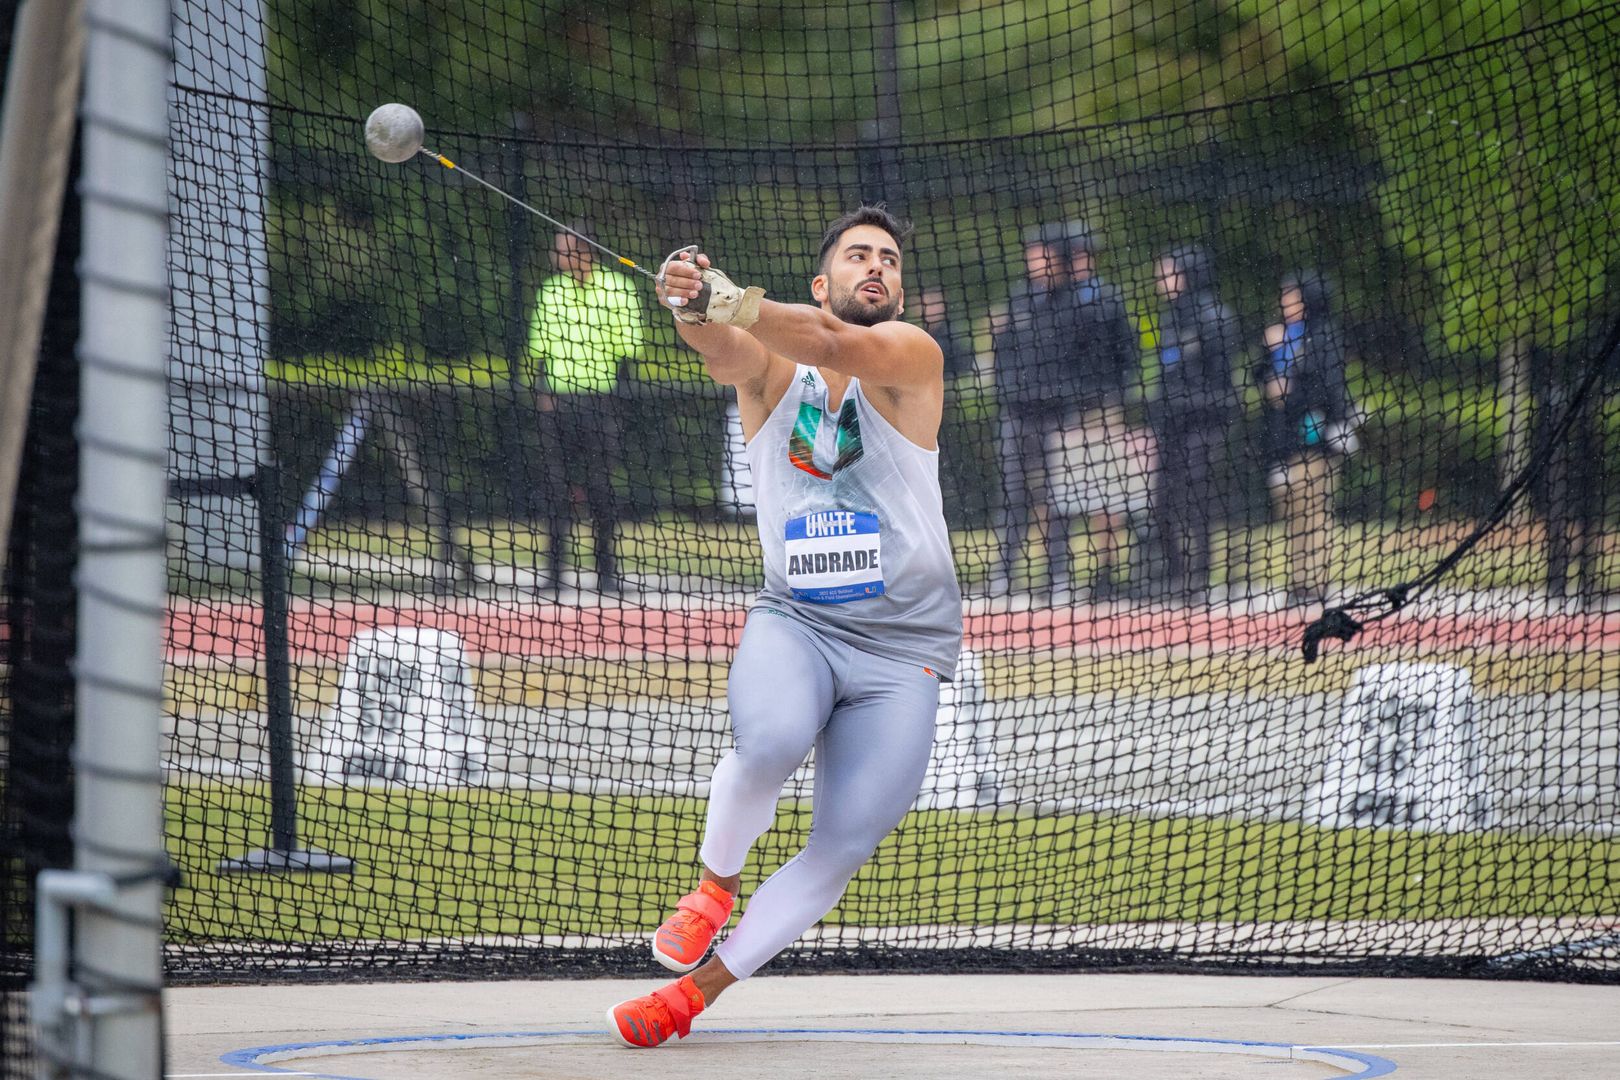 Andrade's Gold Medal Headlines Day 1 at ACCs